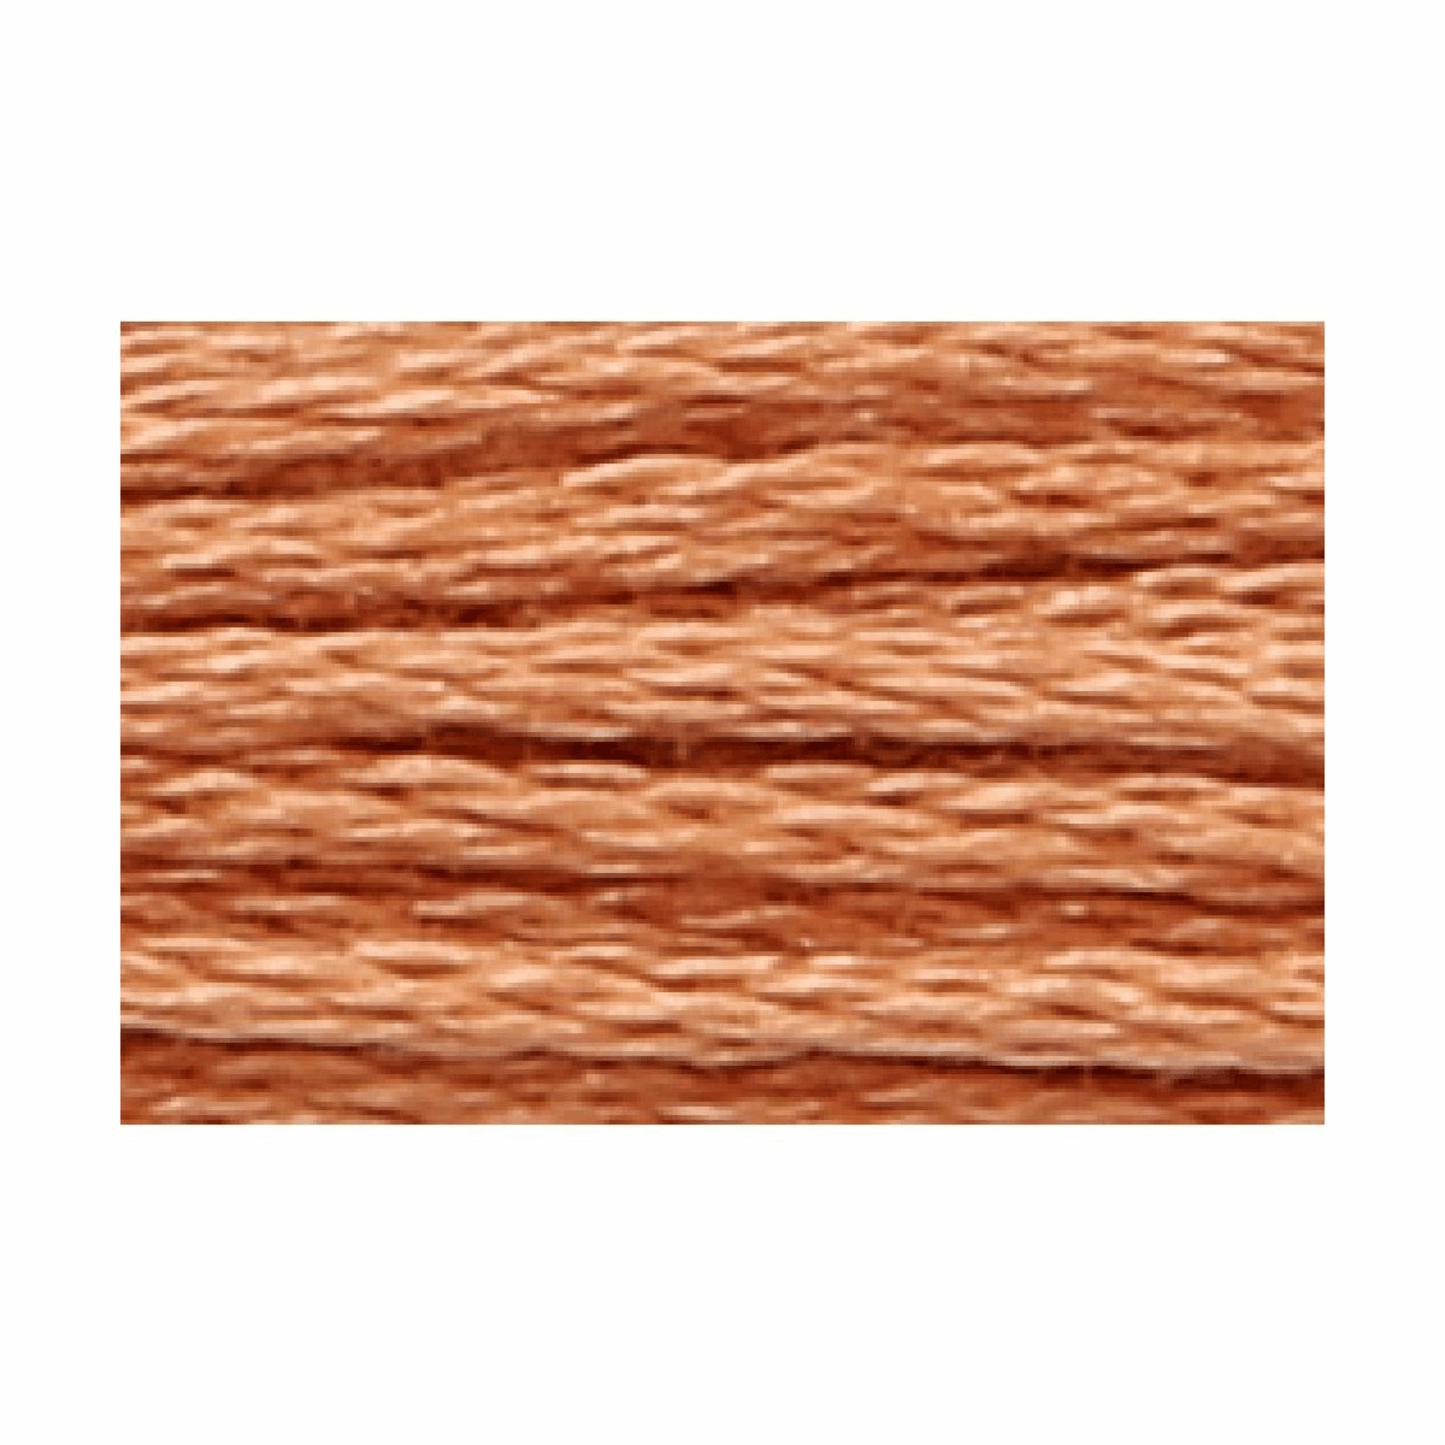 Anchor matt embroidery thread 10m, 5 times lightly twisted, color light brown 369